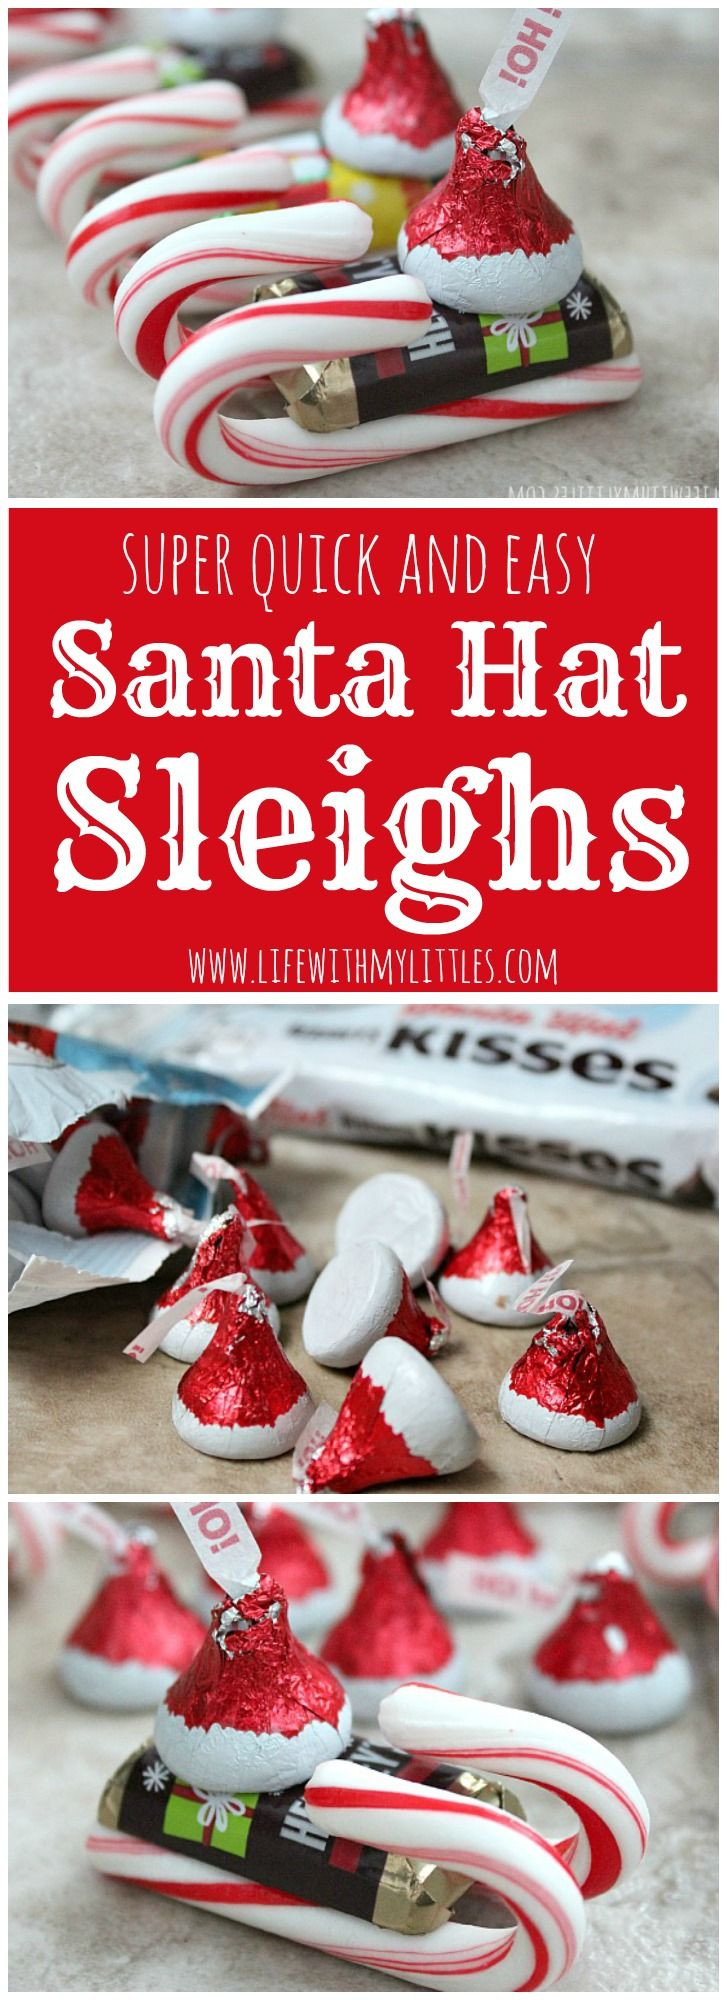 Christmas Candy Gifts
 Best 25 Candy crafts ideas on Pinterest